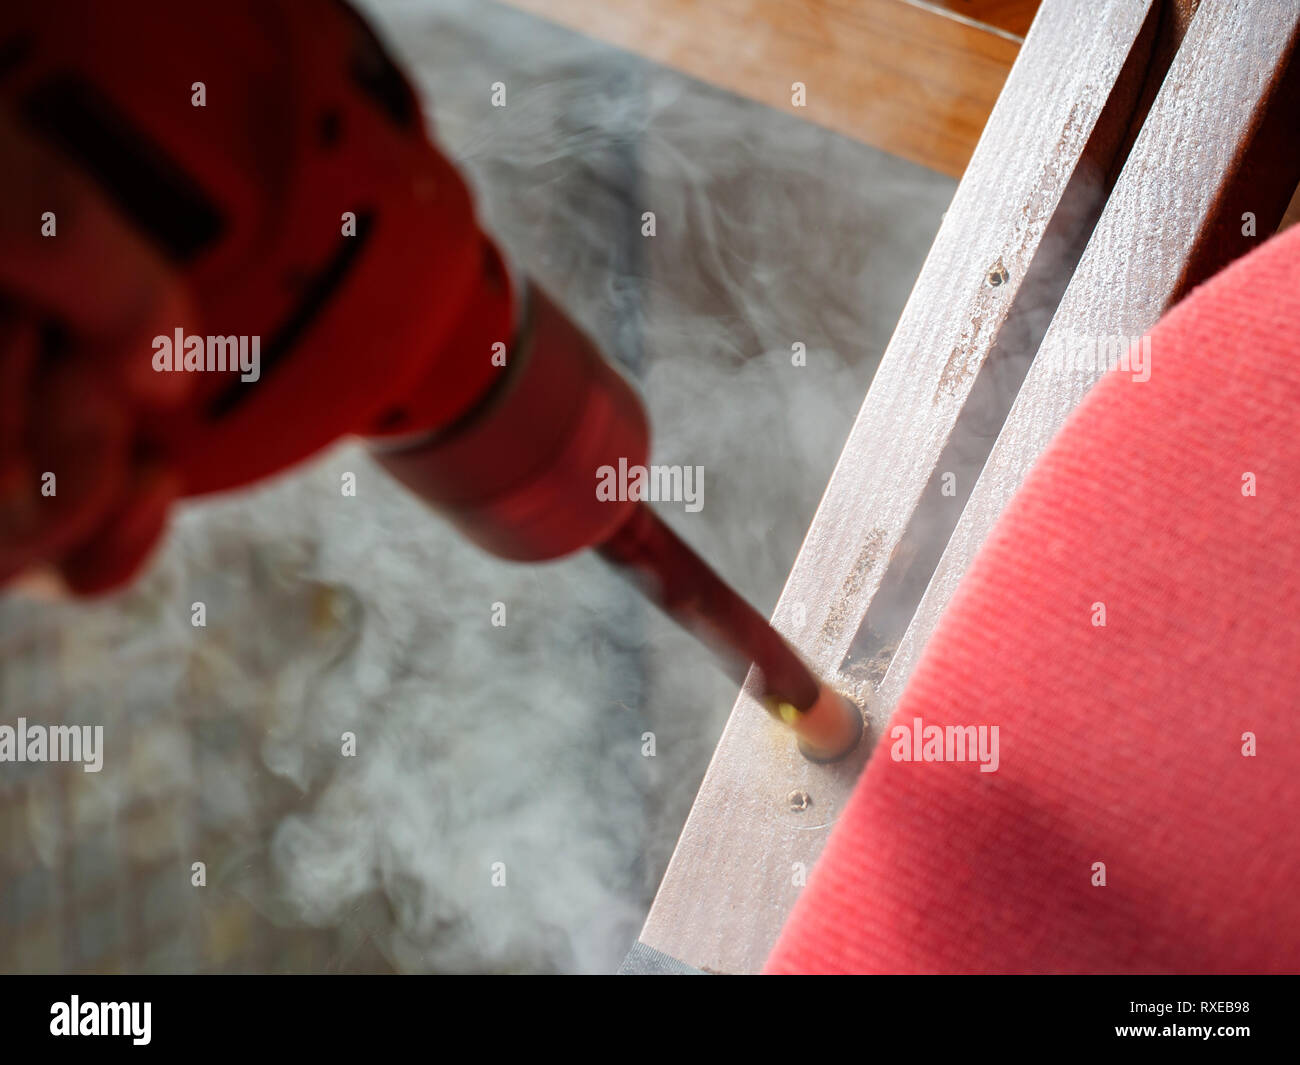 Blunt drill bit, smoke while making hole in wood. DIY issue. Stock Photo